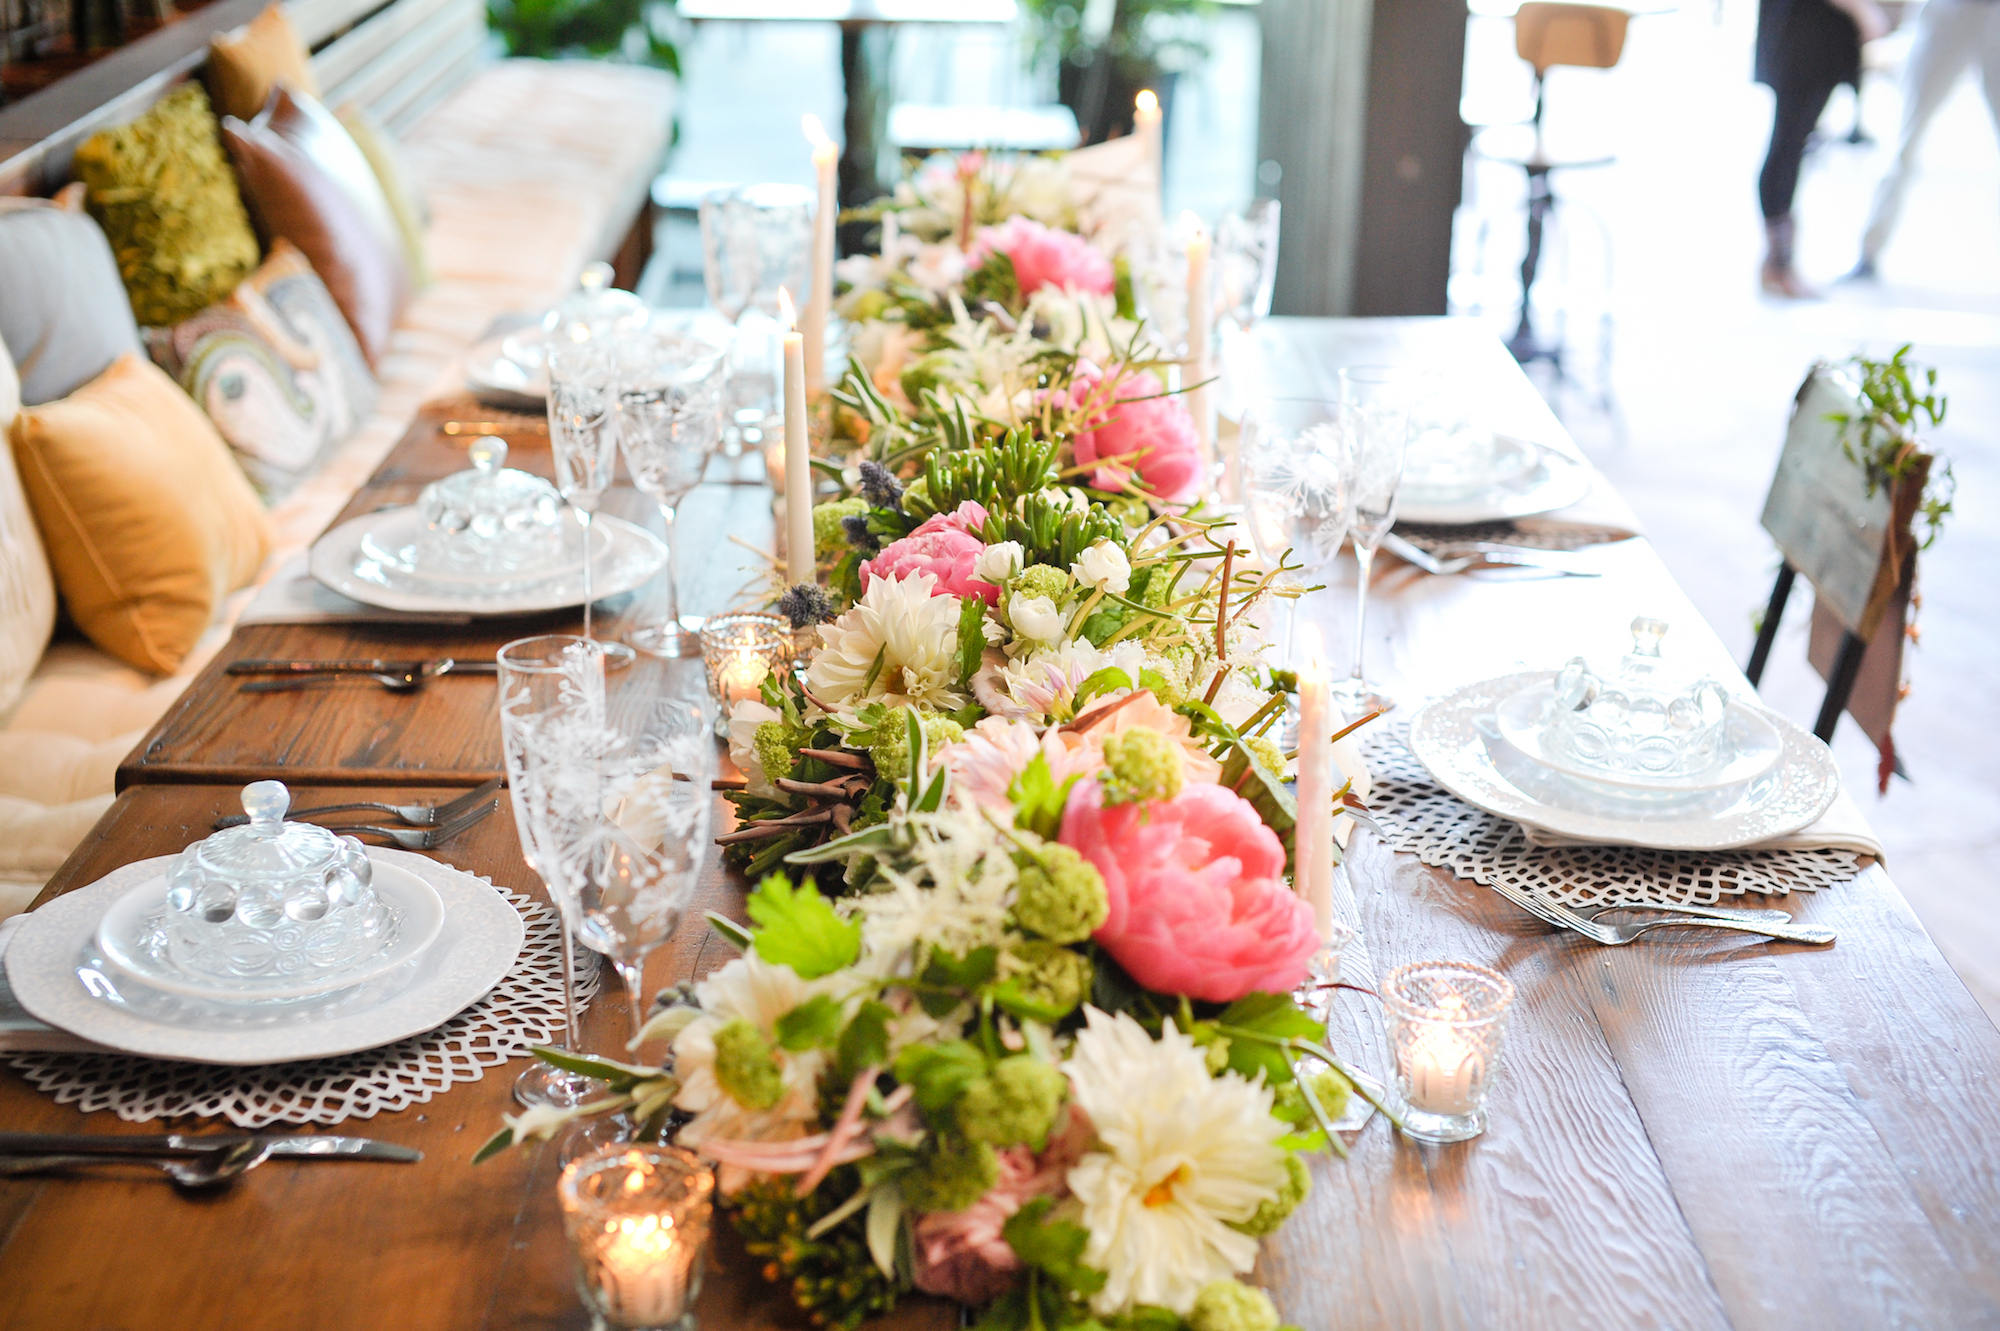 21 Spring Tablescapes to Brighten Your Day